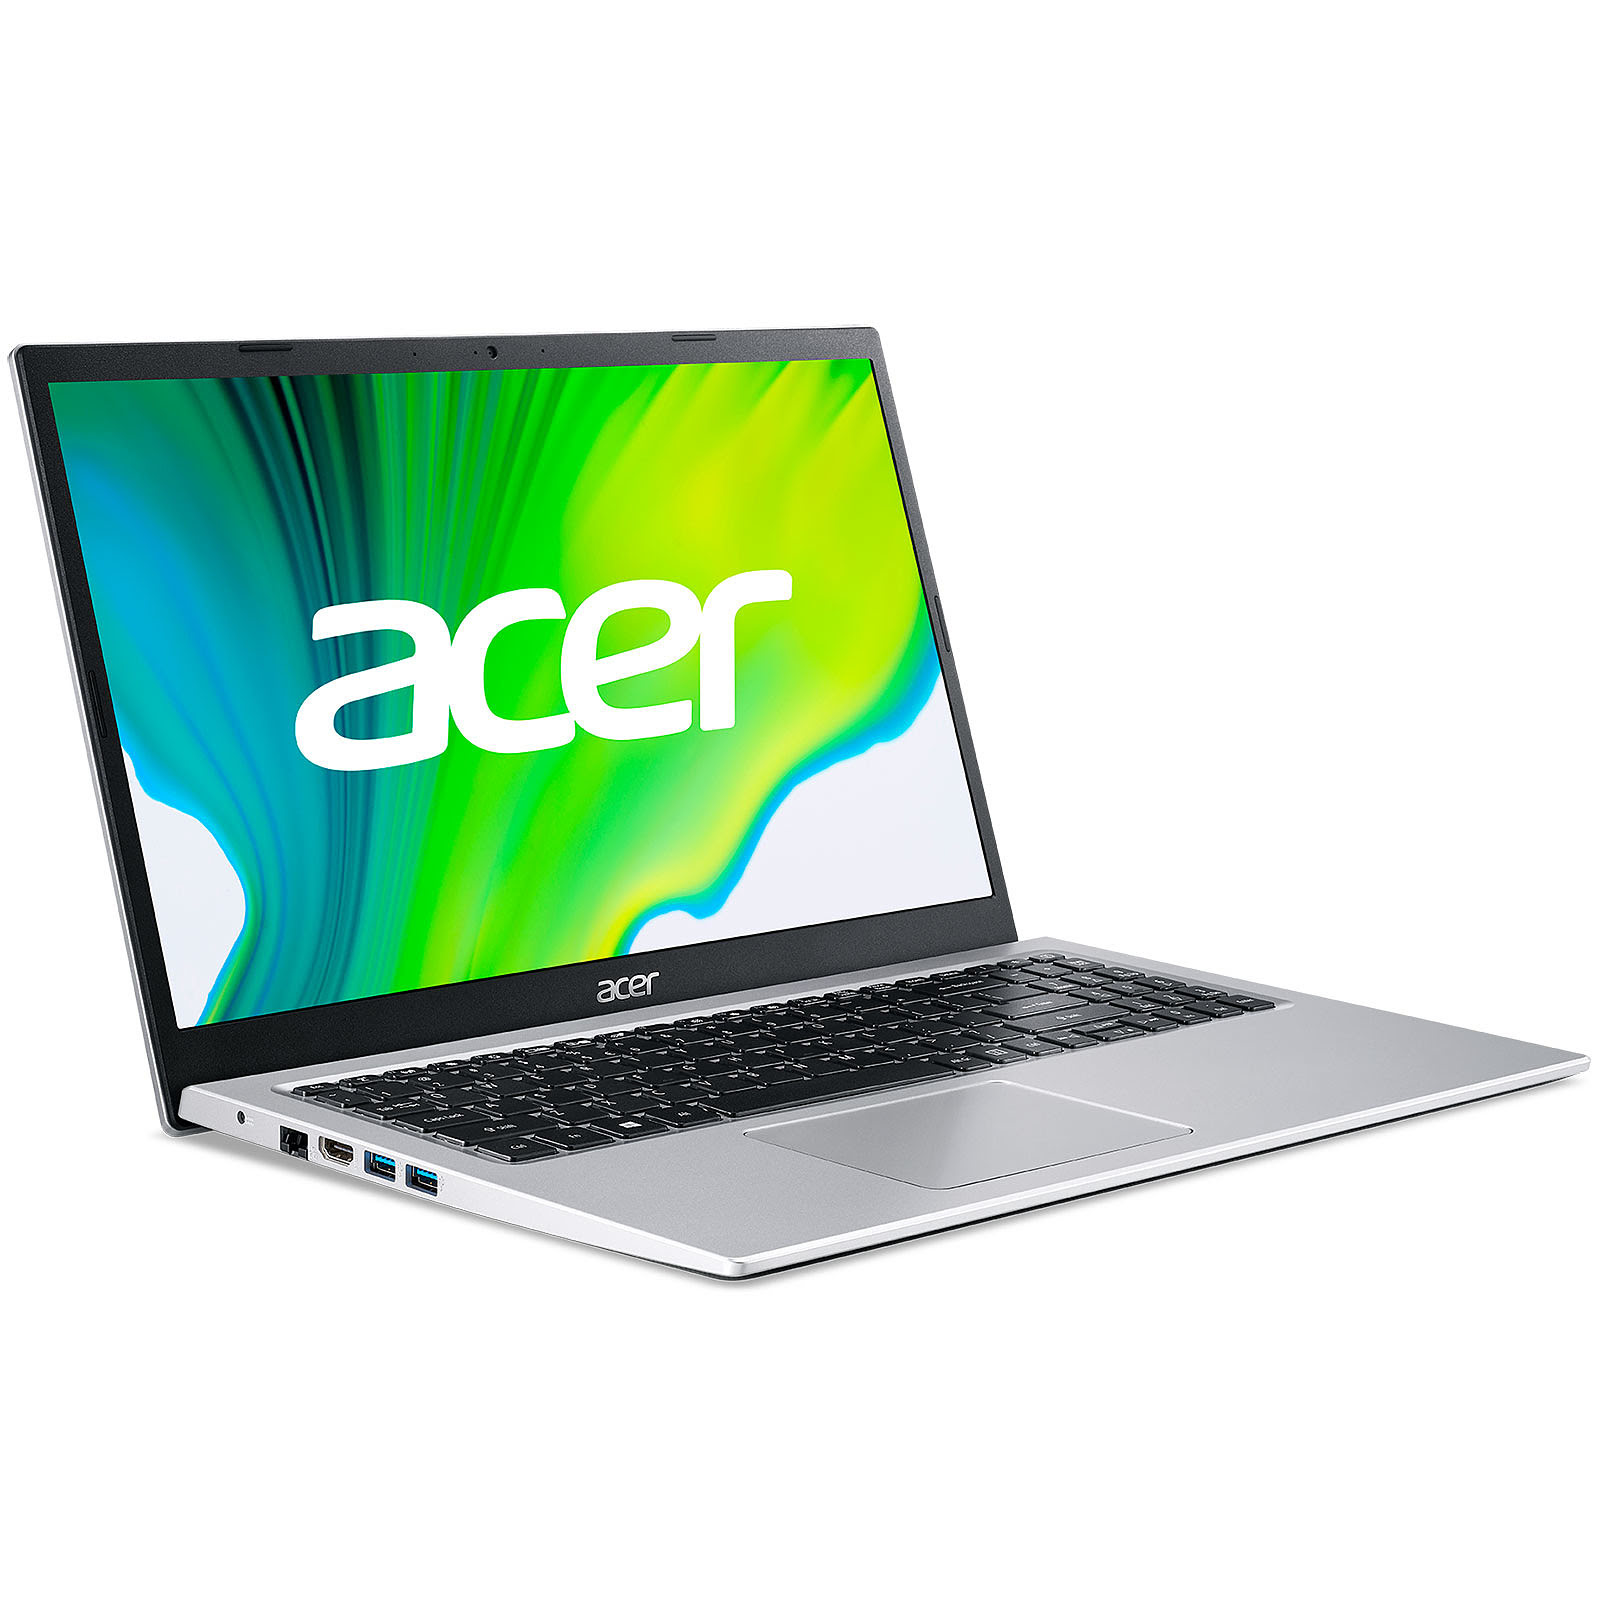 Acer NX.A6LEF.008 - PC portable Acer - grosbill-pro.com - 0